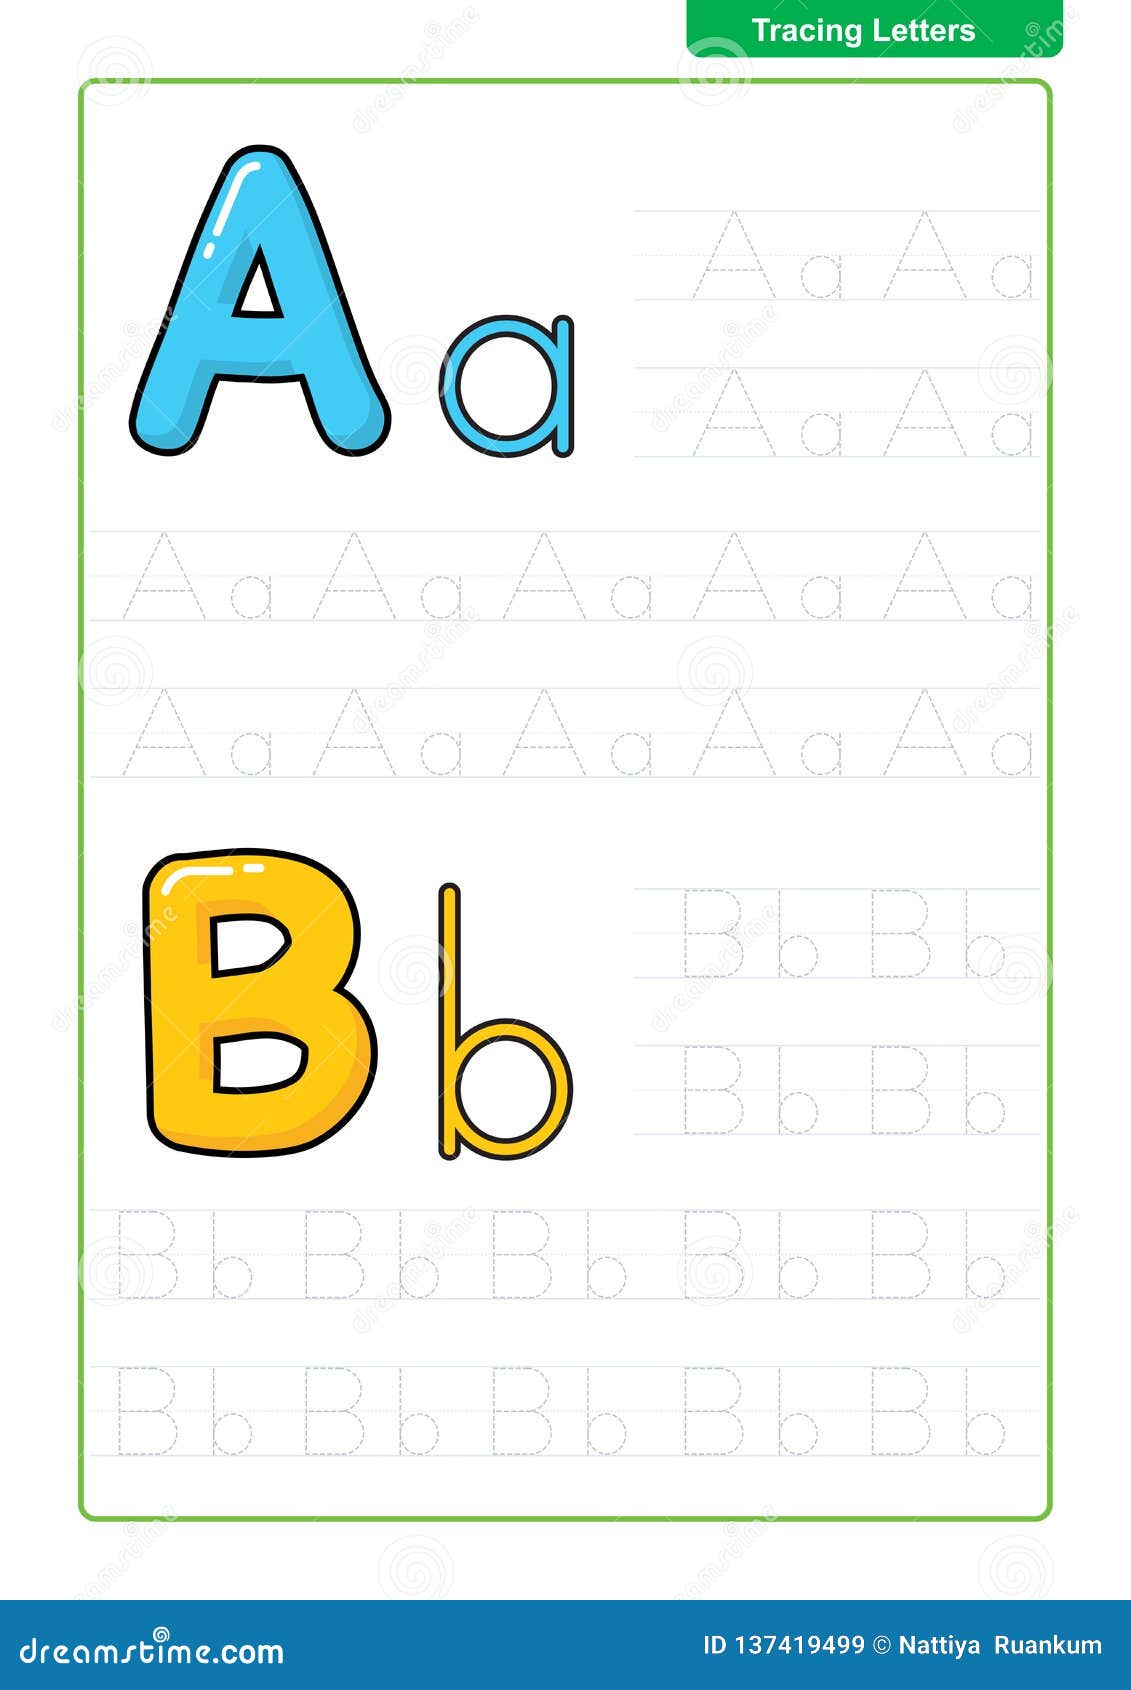 abc letters for kids printable